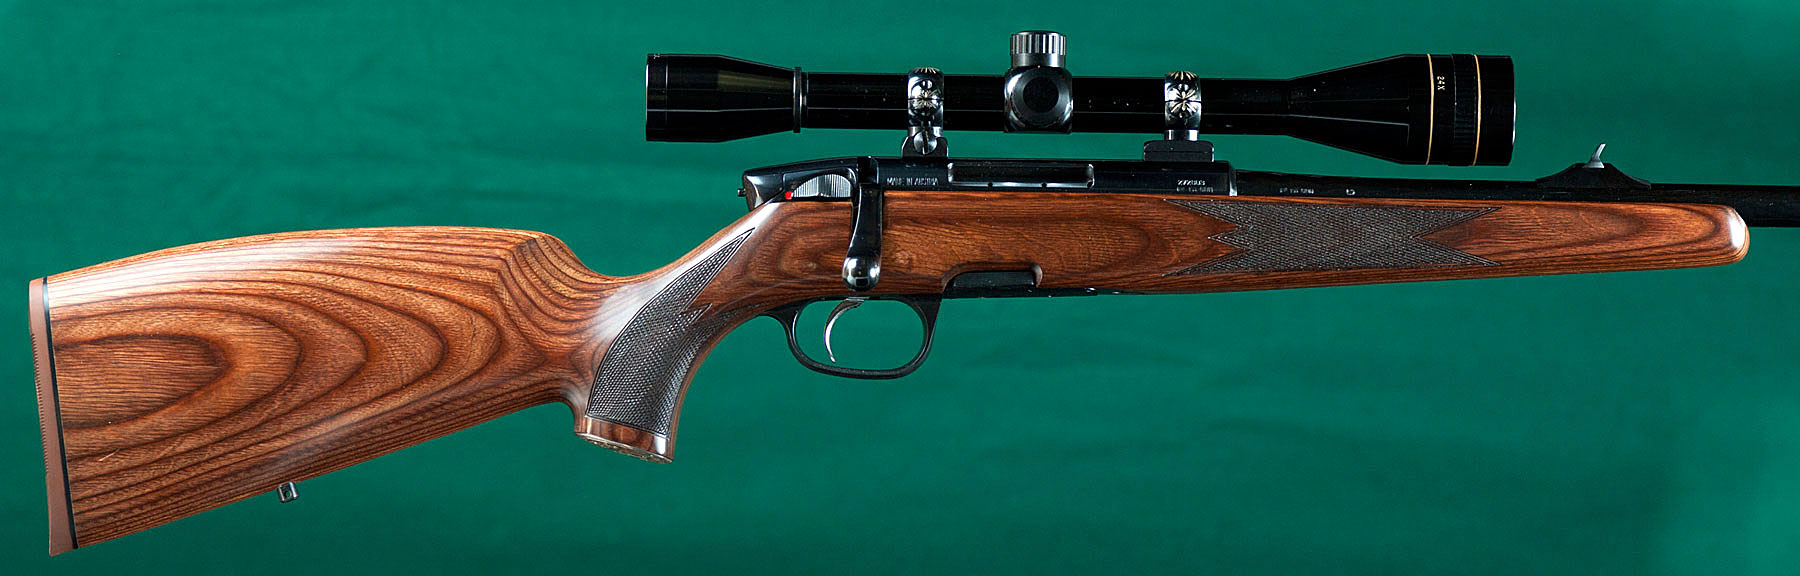 This wood stock fits the steyr mannlicher sl model. 